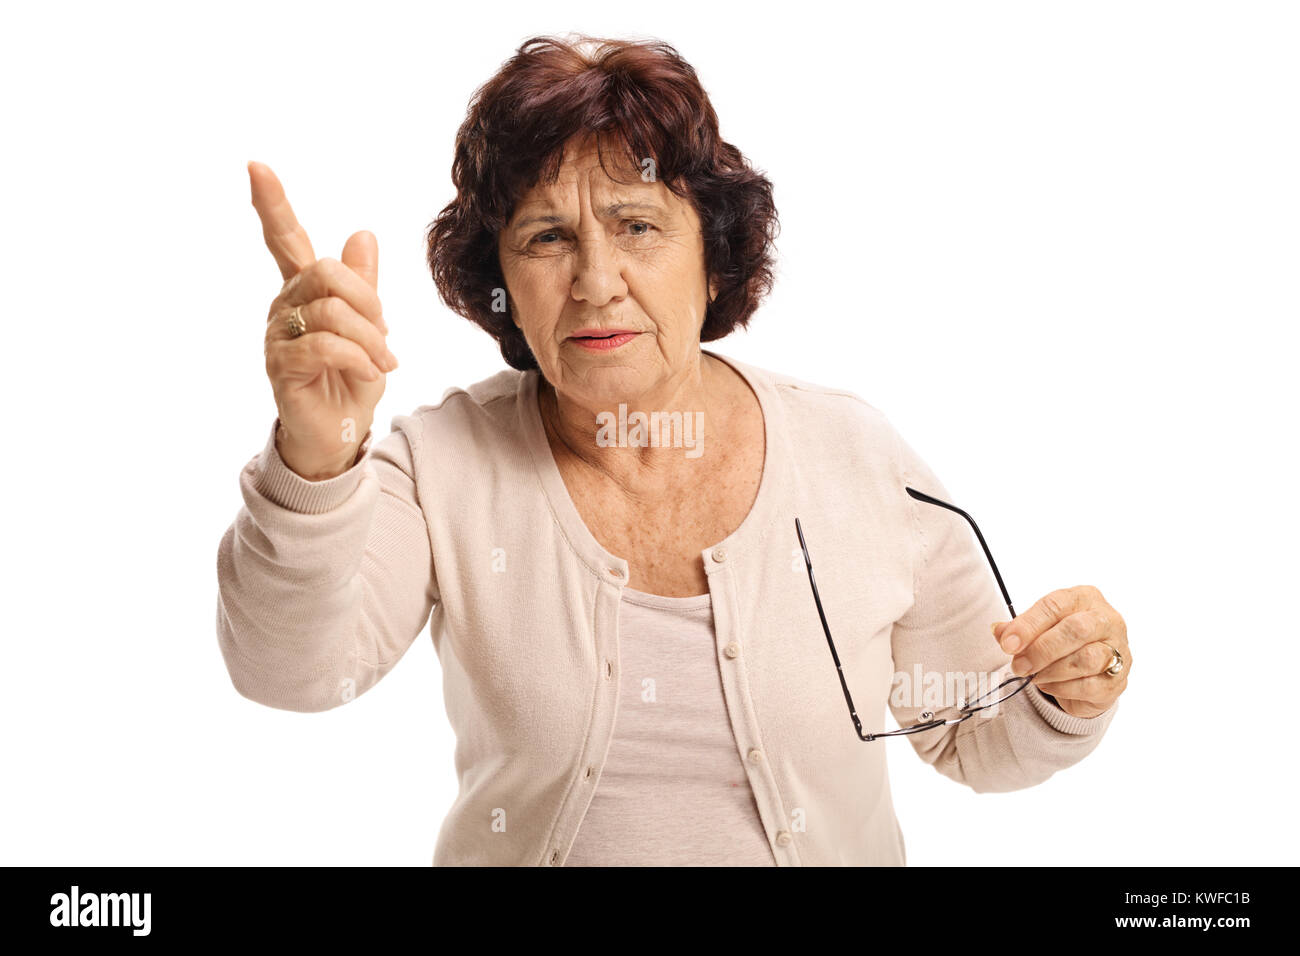 Angry elderly woman scolding someone and gesturing with her finger isolated on white background Stock Photo